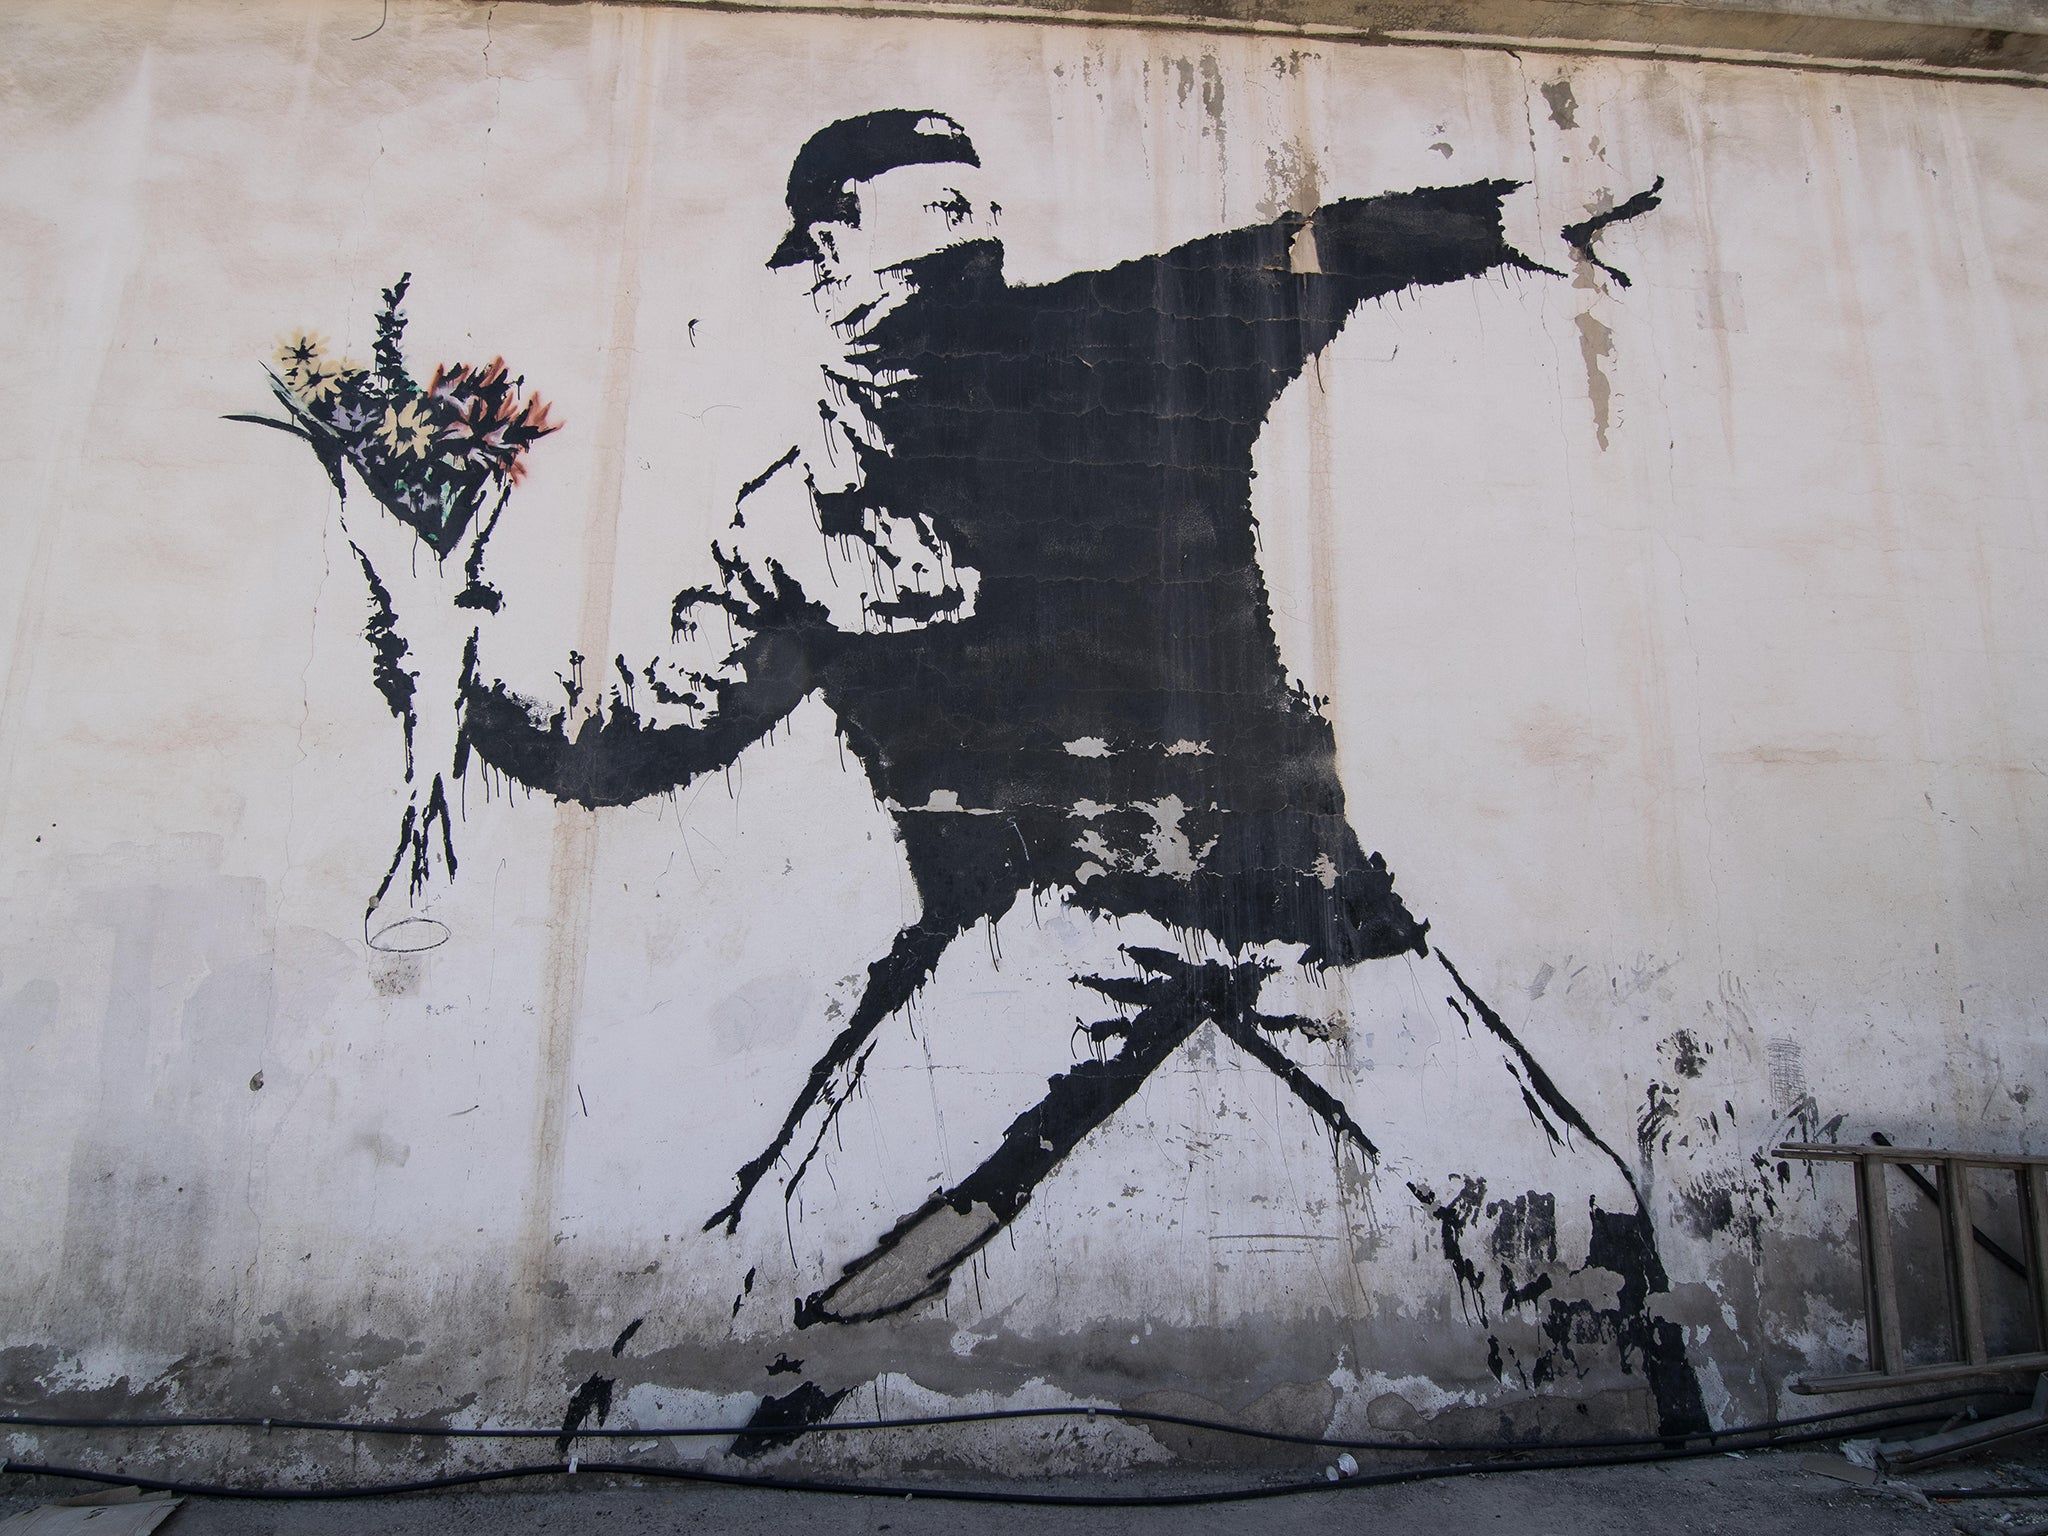 artworks by Banksy: Who Is The Visionary of Street Art. STREET ART UTOPIA